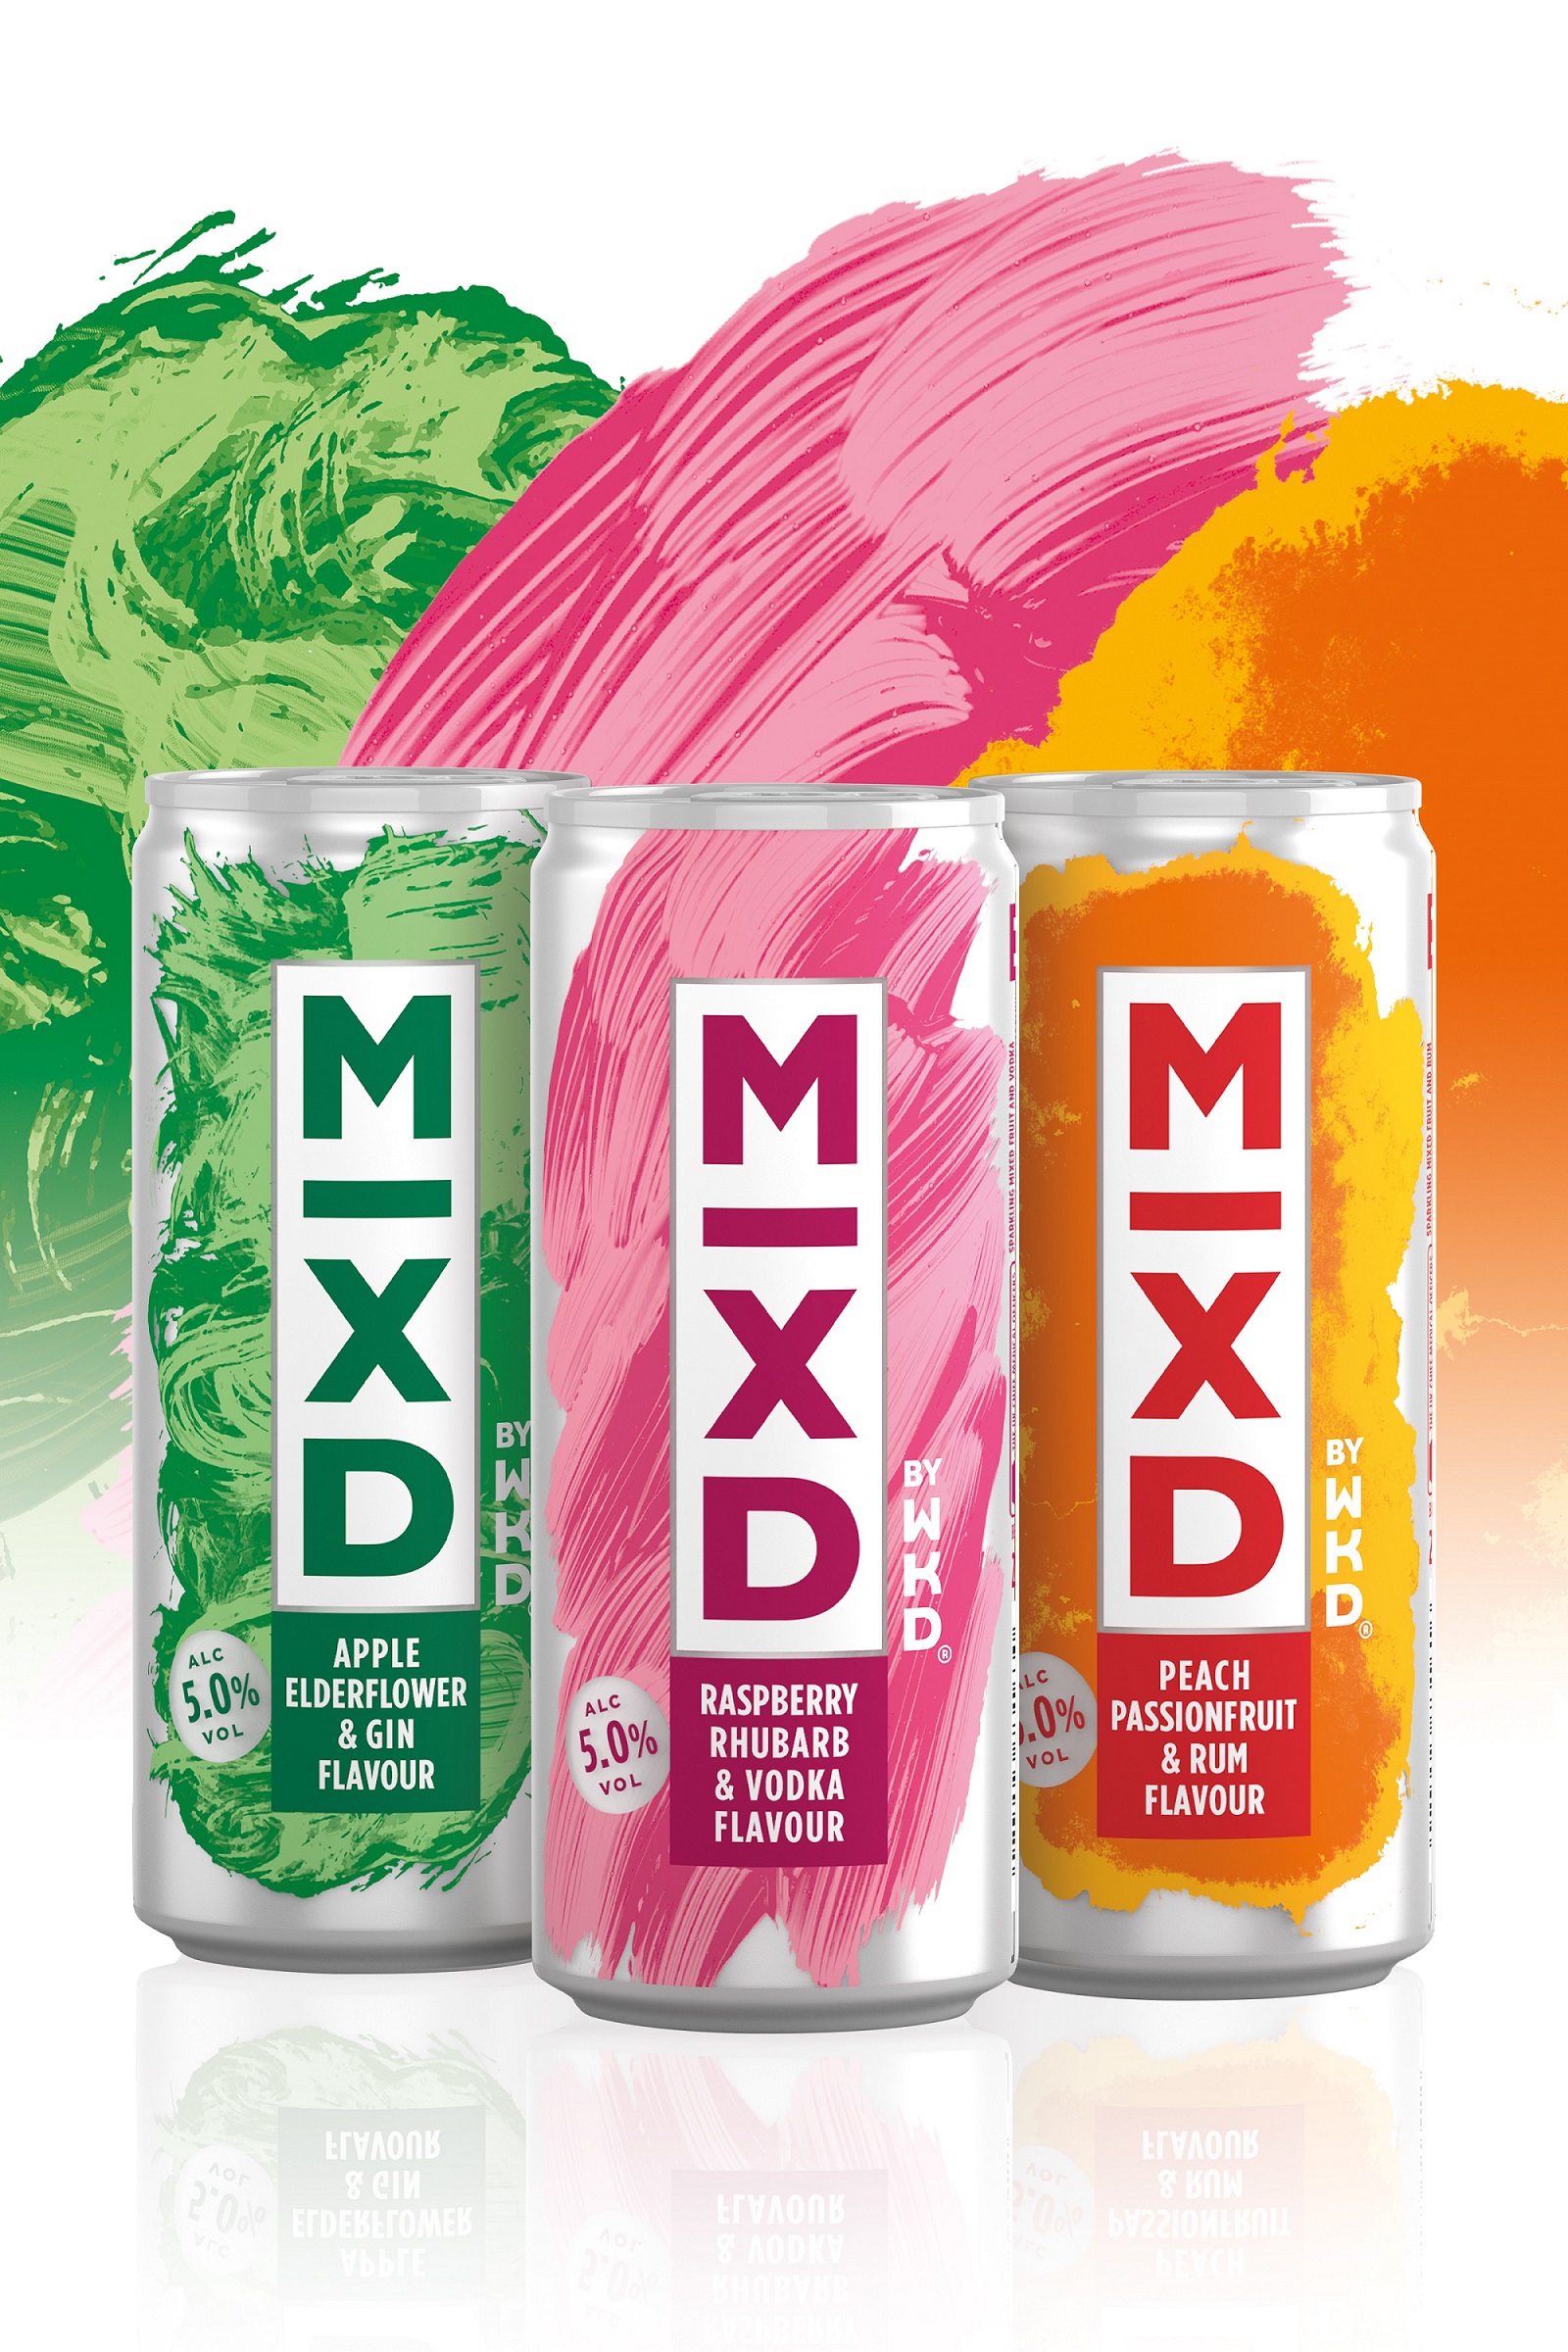 WKD takes fresh approach to cocktails in cans